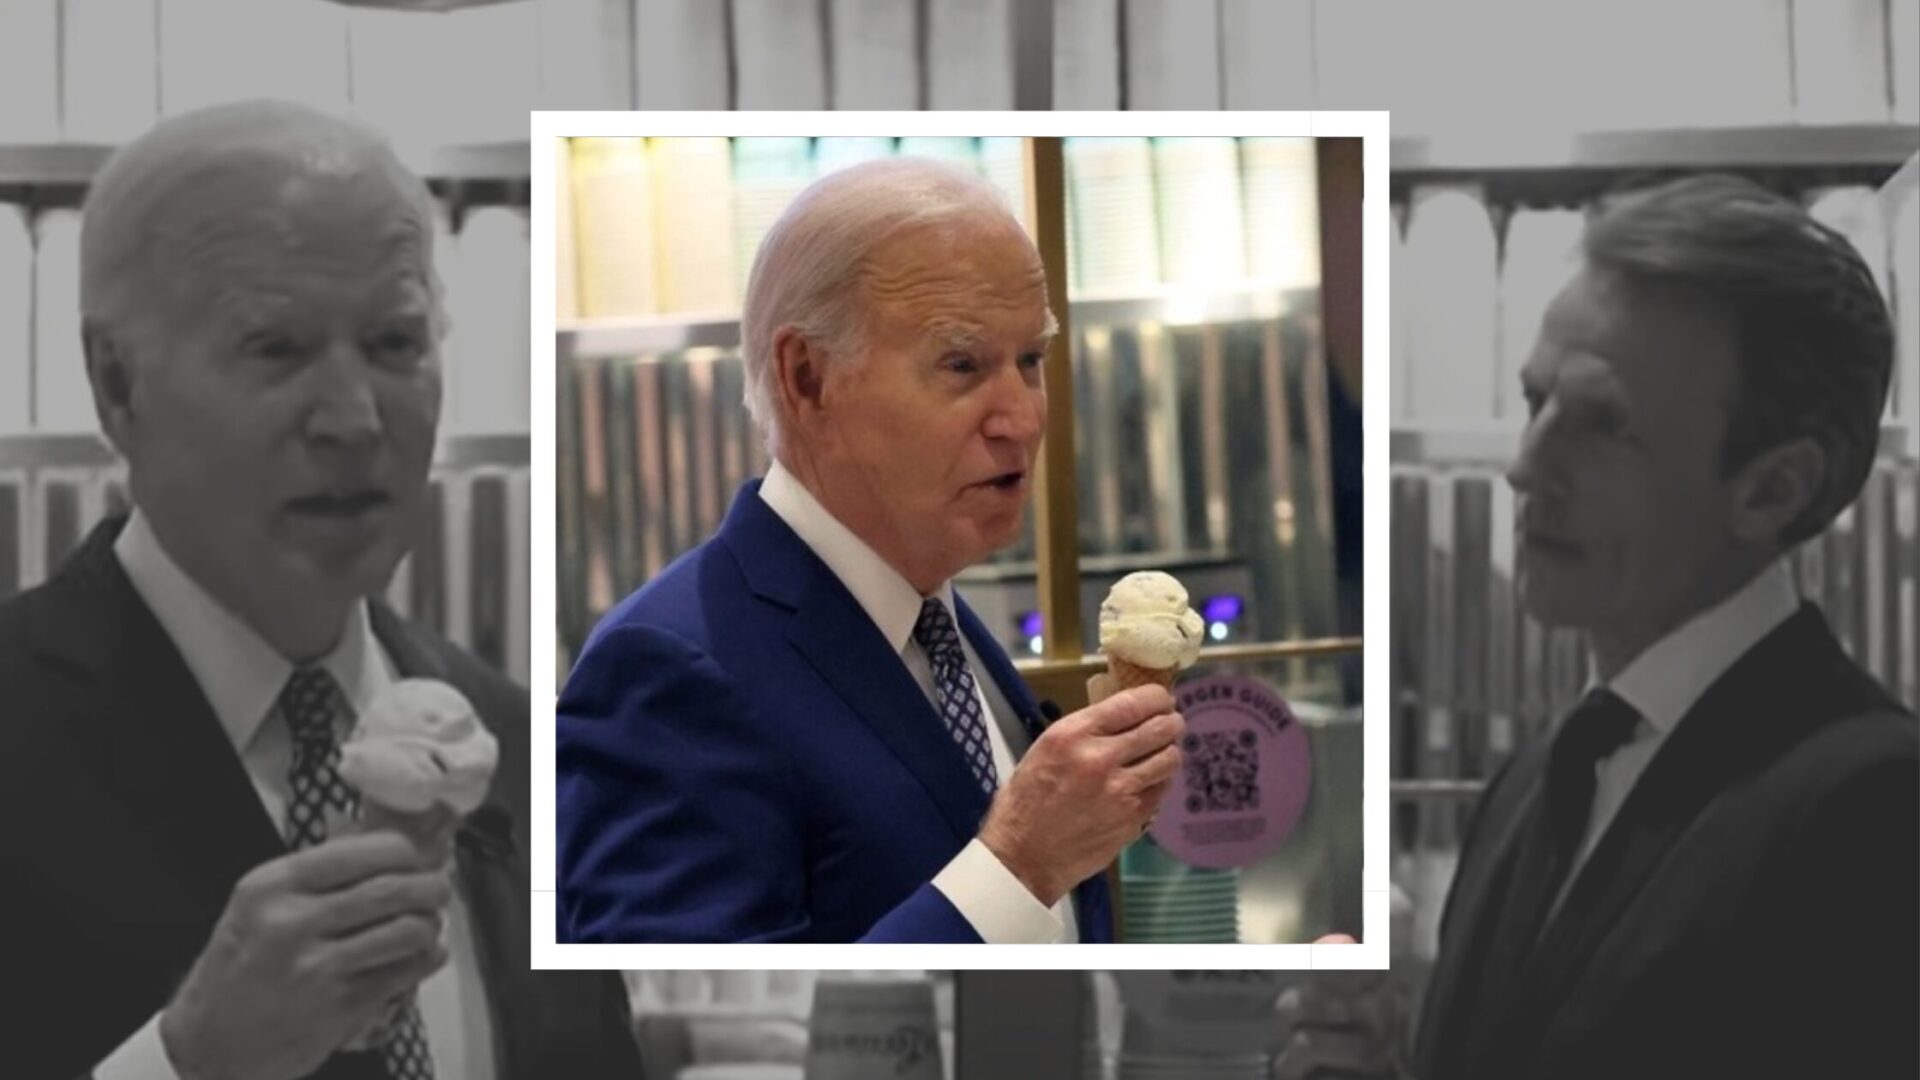 You are currently viewing Optics matter – Biden ice cream interview gets frosty reception